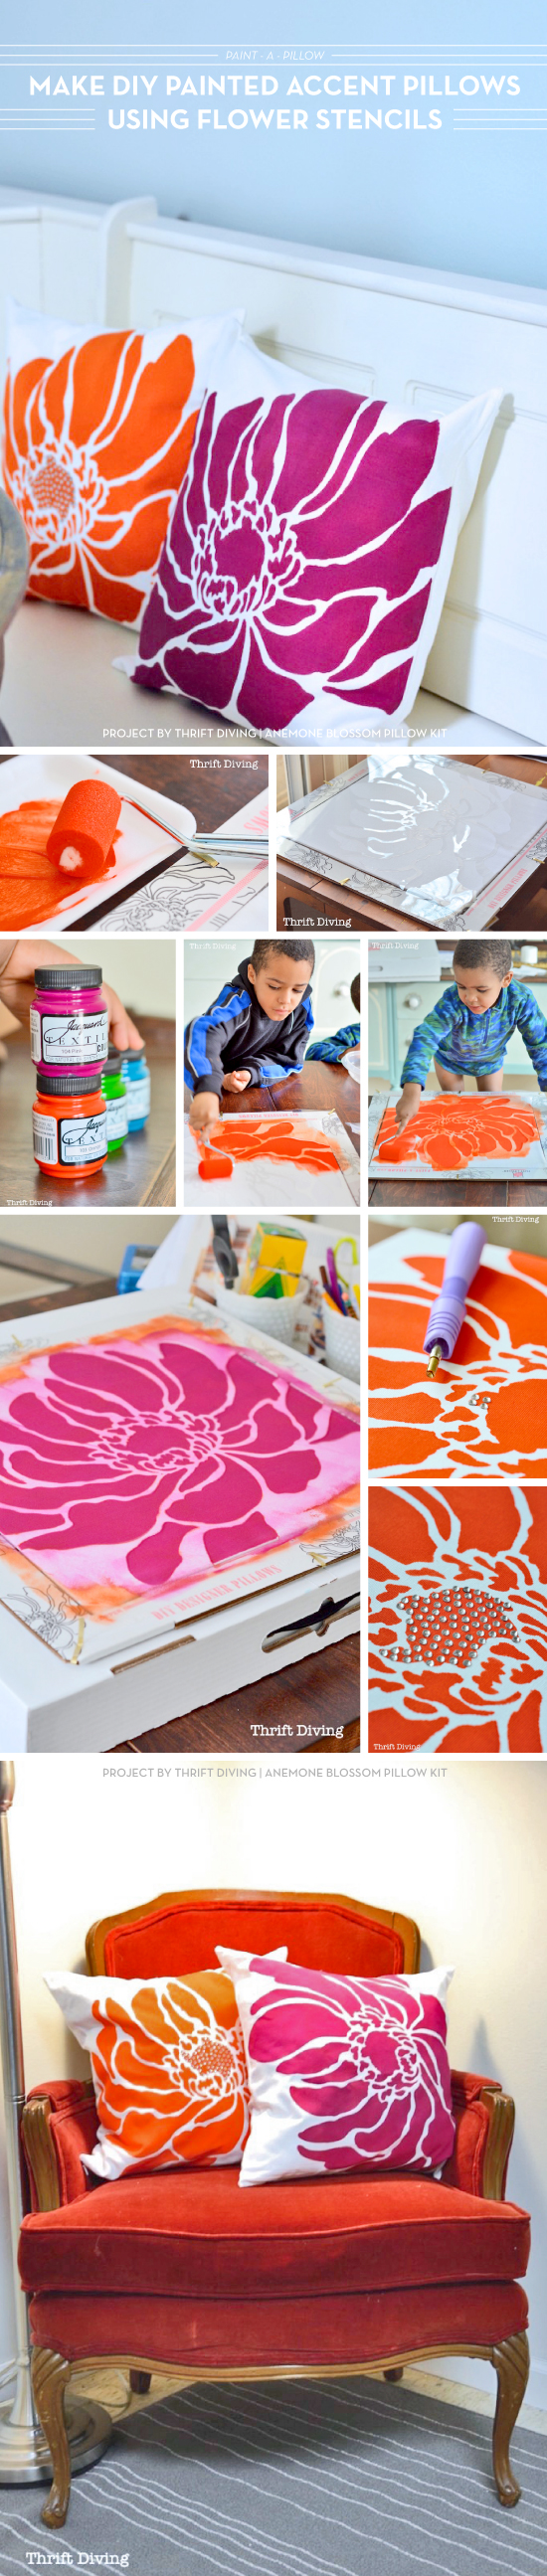 Cutting Edge Stencils shares how to DIY accent pillows using the Anemone Blossom Paint-A-Pillow kit. http://paintapillow.com/index.php/anemone-blossom-paint-a-pillow-kit.html